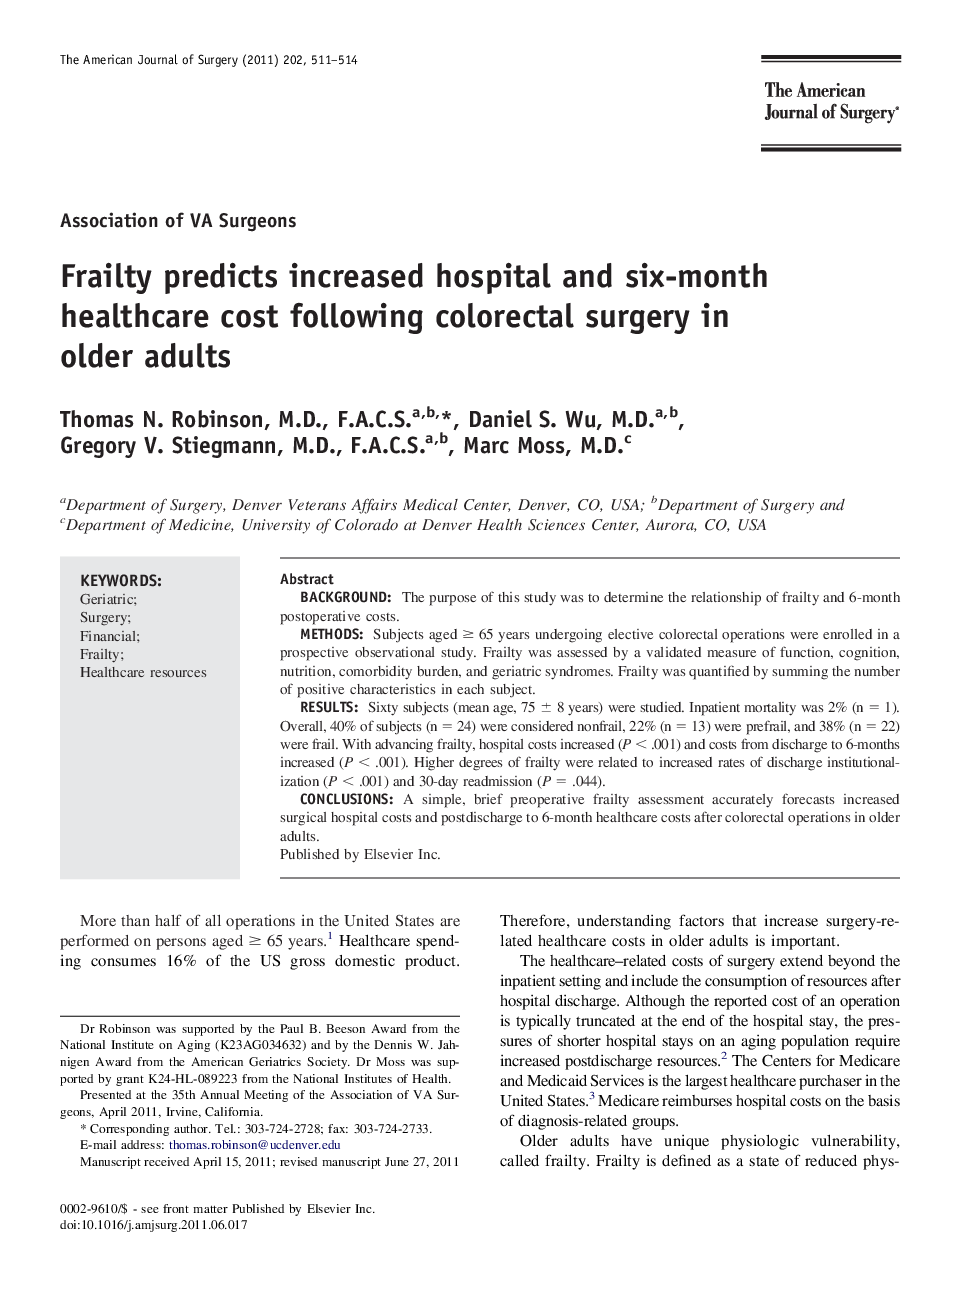 Frailty predicts increased hospital and six-month healthcare cost following colorectal surgery in older adults 